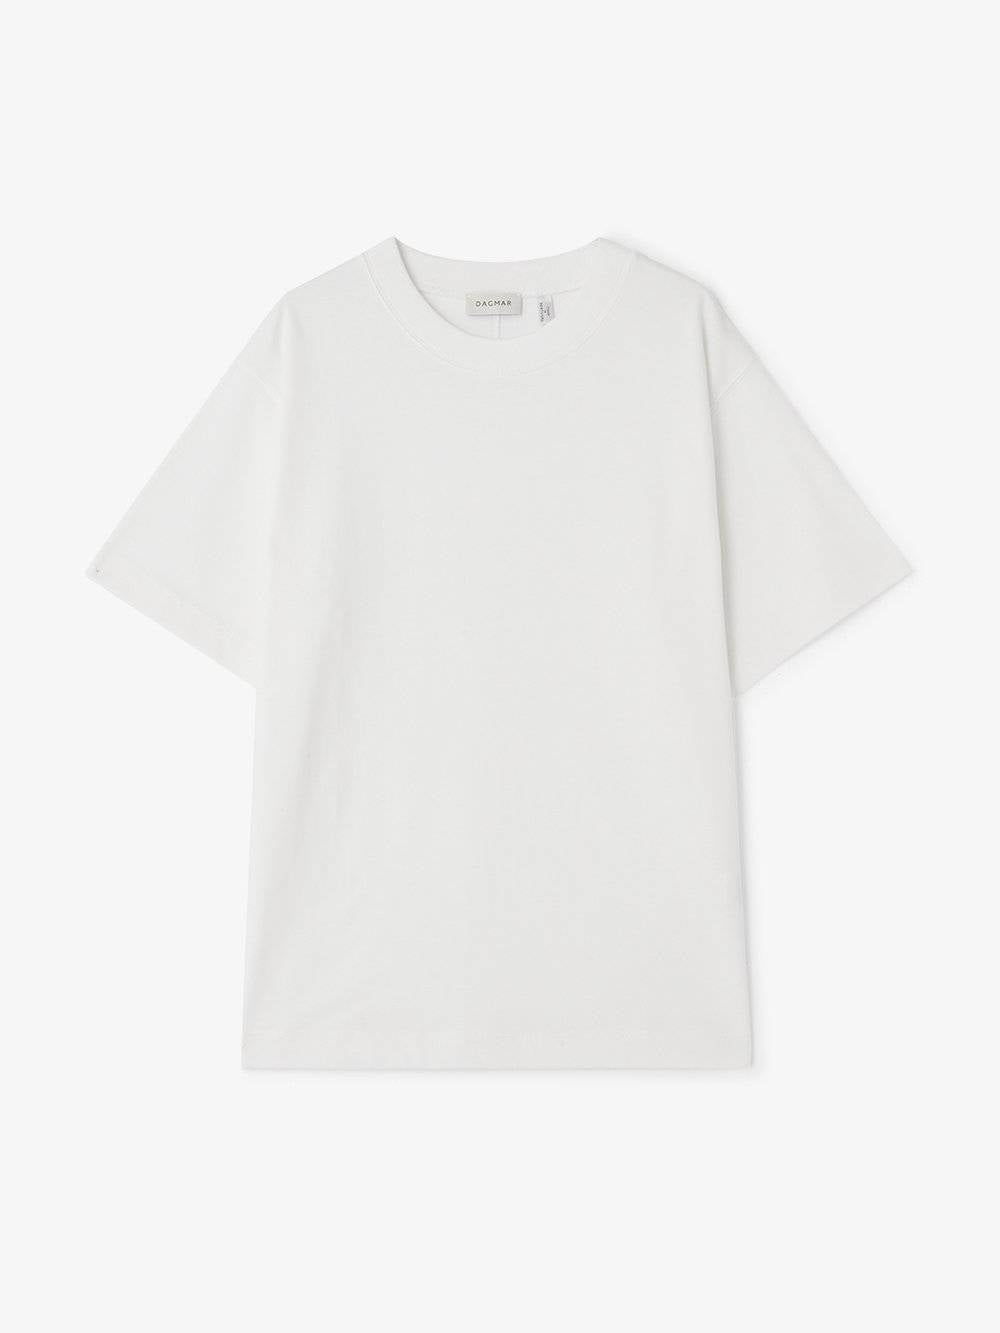 OVERSIZED COTTON TOP